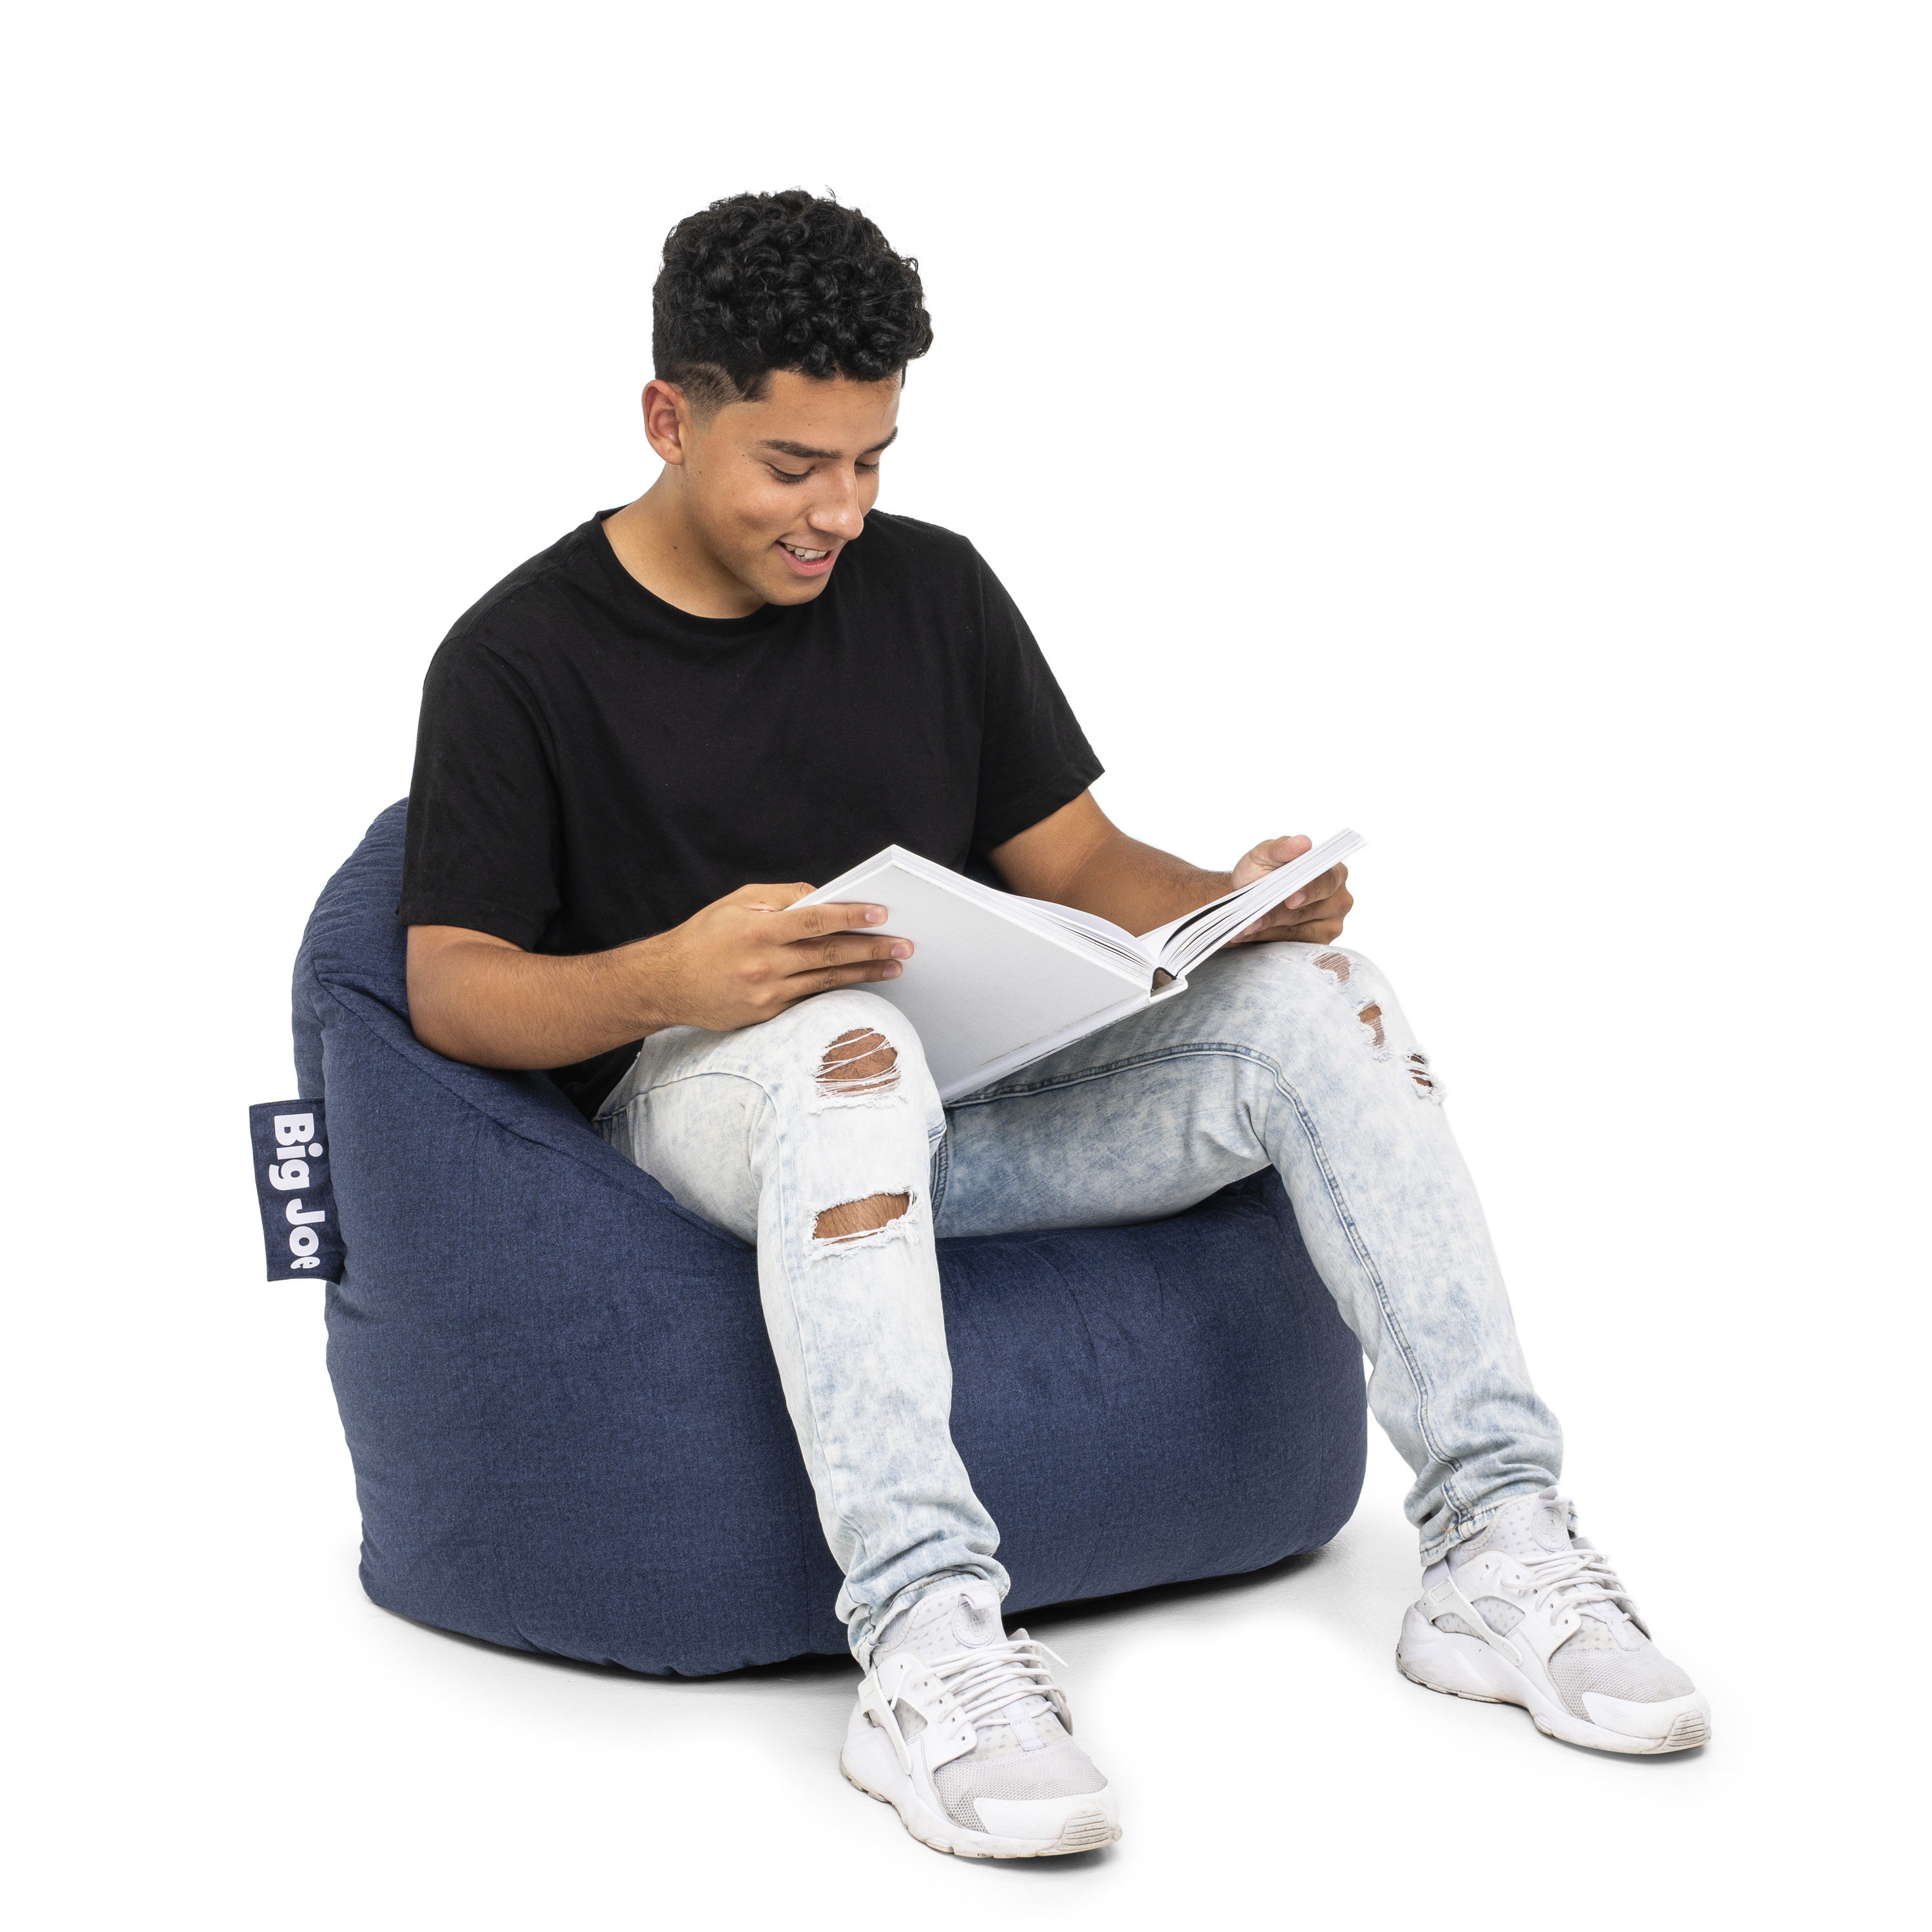 model sitting on a structured beanbag chair